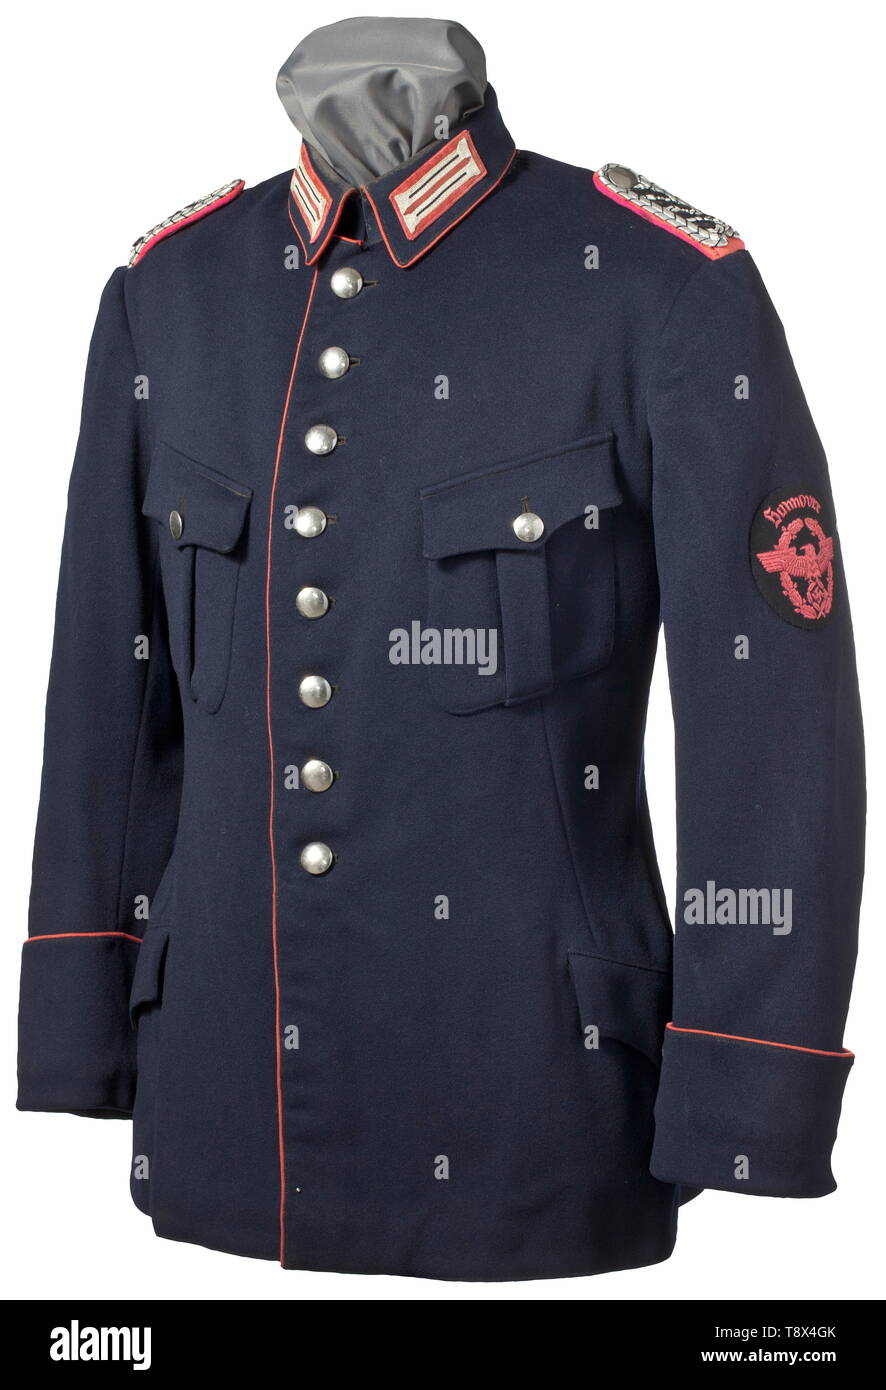 A coat for a Meister (Senior NCO) of the fire brigade/fire protection police Hannover inherited old style coat from the Weimar period Fine dark blue woollen cloth, silver buttons, crimson piping and insignia. Hand-embroidered crimson sleeve eagle with lettering 'Hannover' on black base. historic, historical, 20th century, Additional-Rights-Clearance-Info-Not-Available Stock Photo